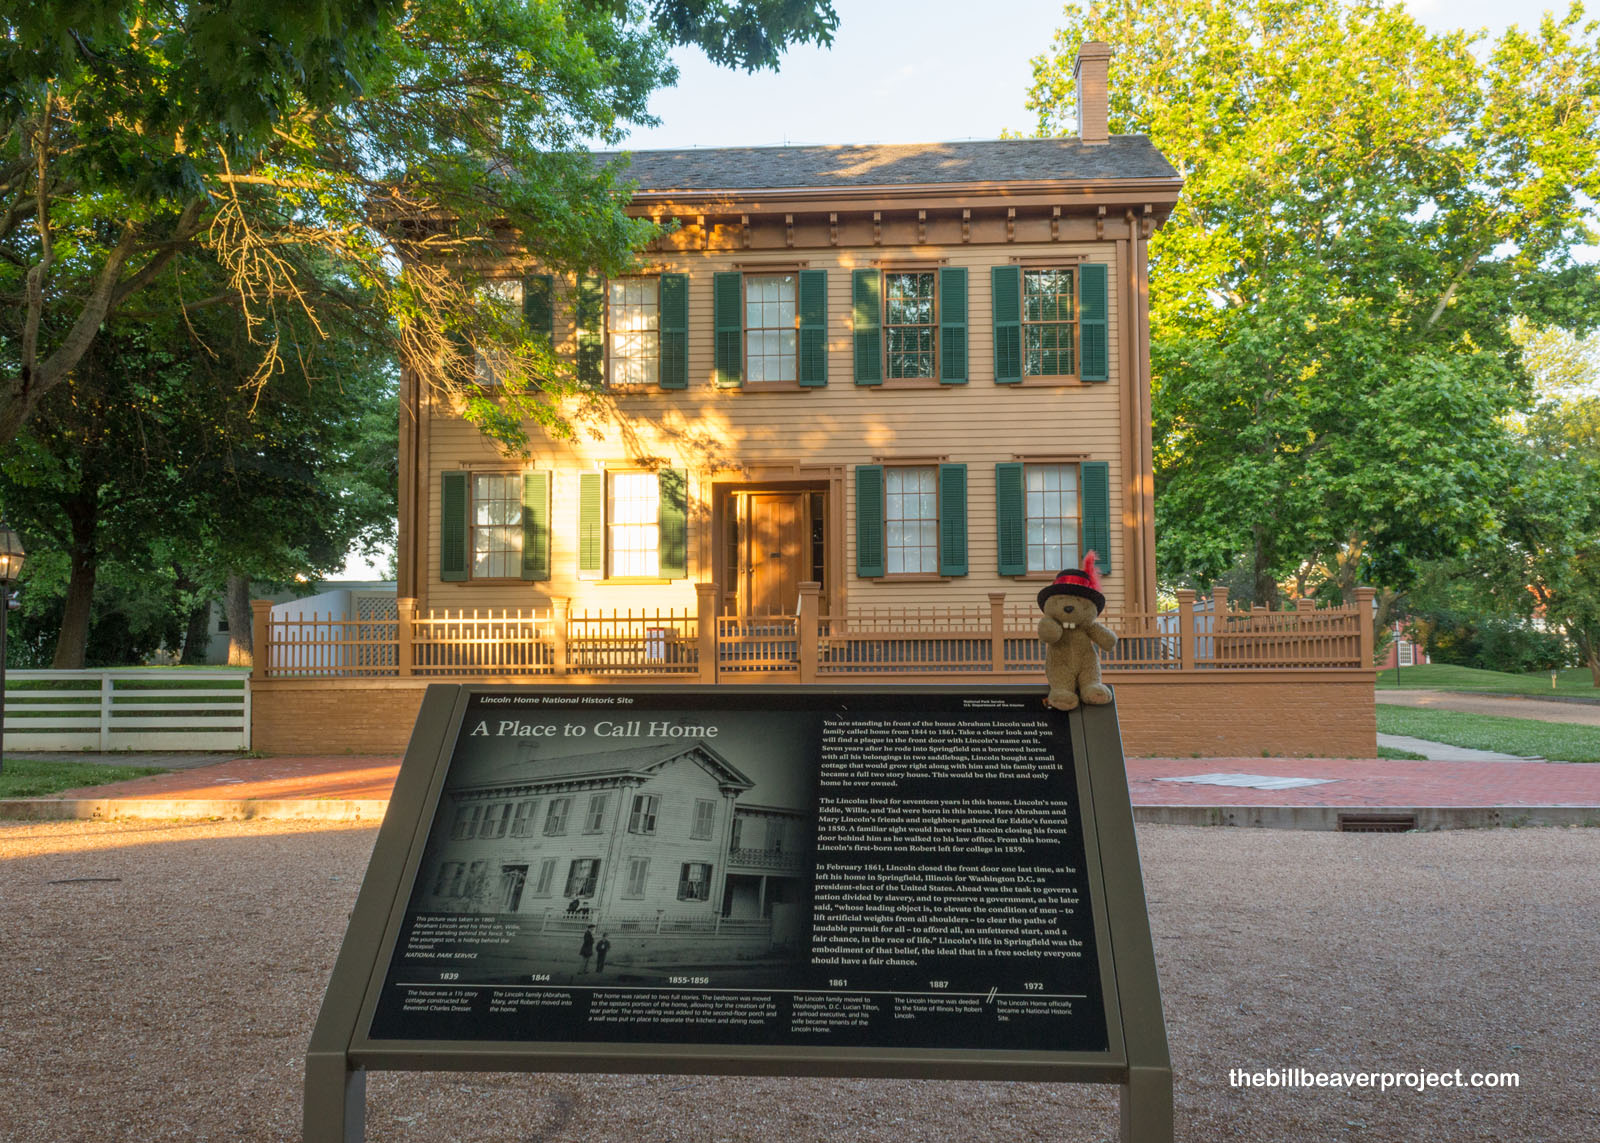 Lincoln Home National Historic Site